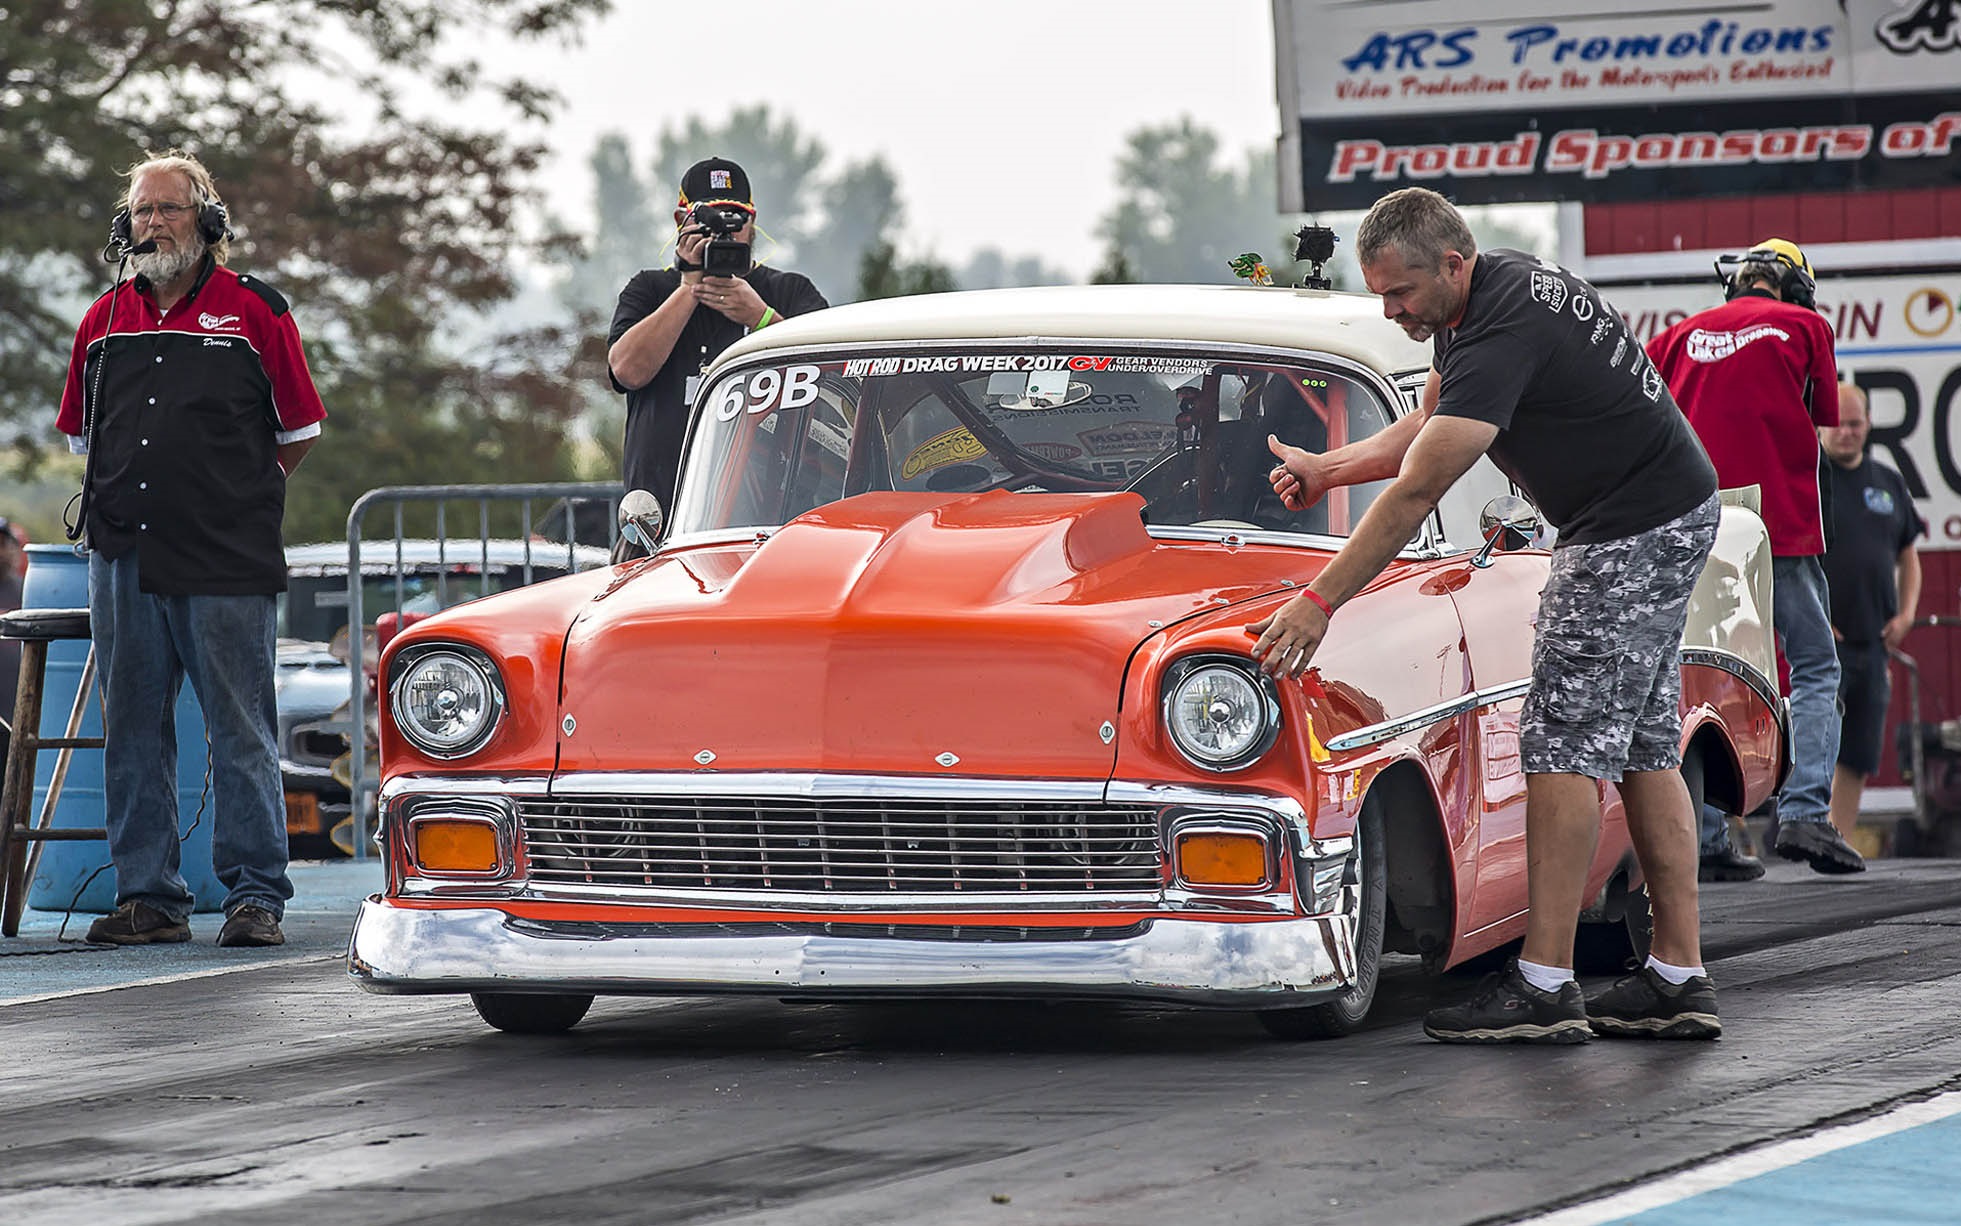 Attached picture 585-Thursday-Great-Lakes-Drag-Week-2017.jpg